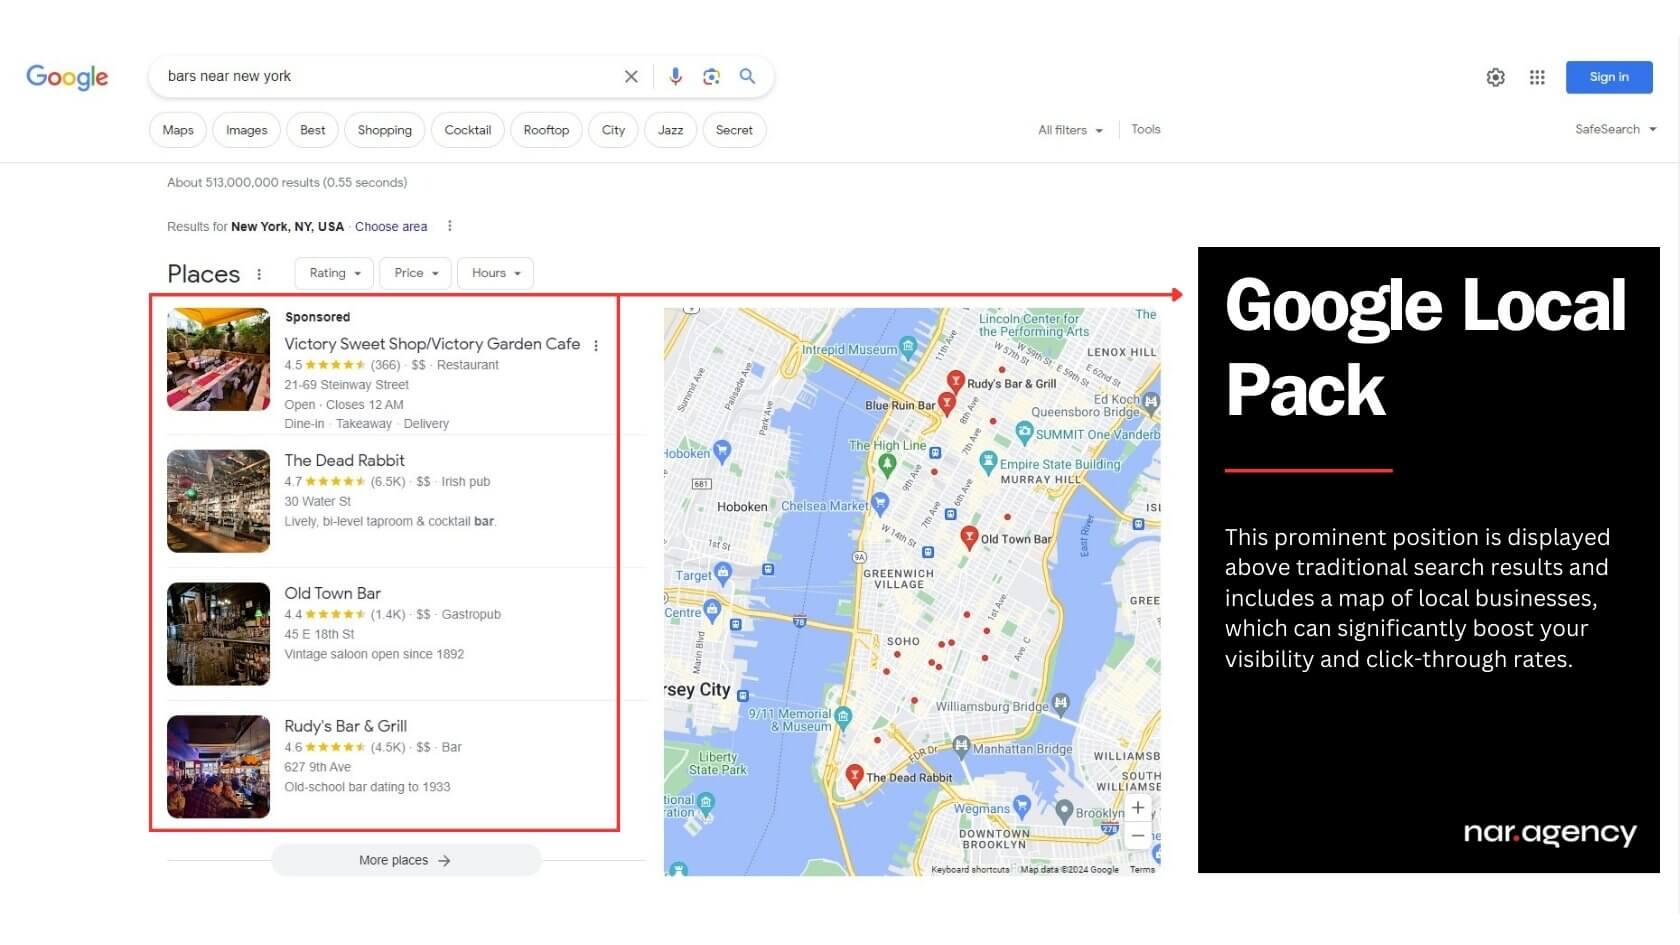 Google Local Pack search results next to a Google Map, showcasing local business visibility.